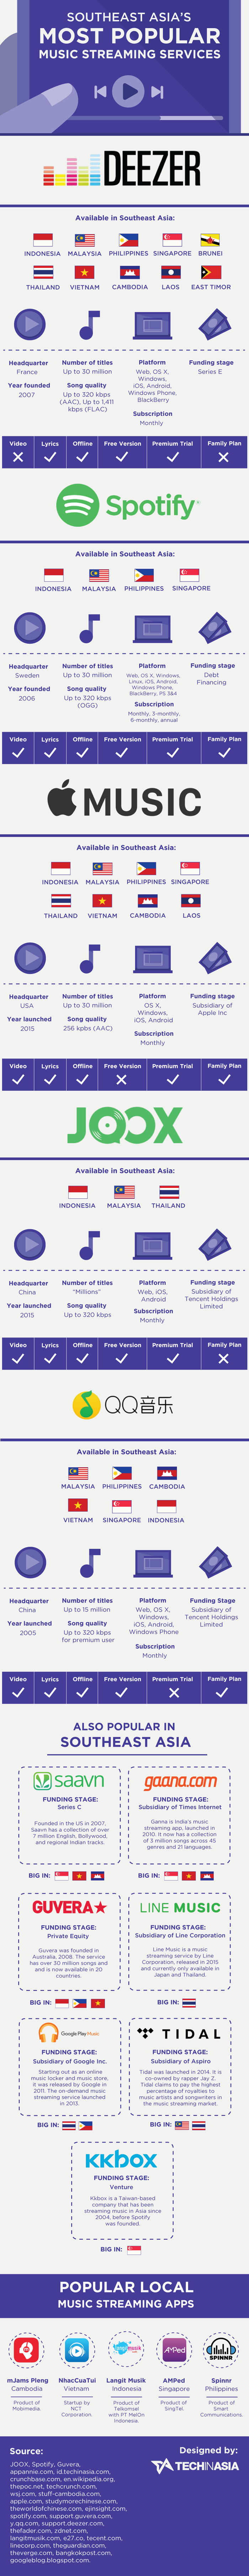 southeast-asia-popular-music-streaming-service-infographic-700